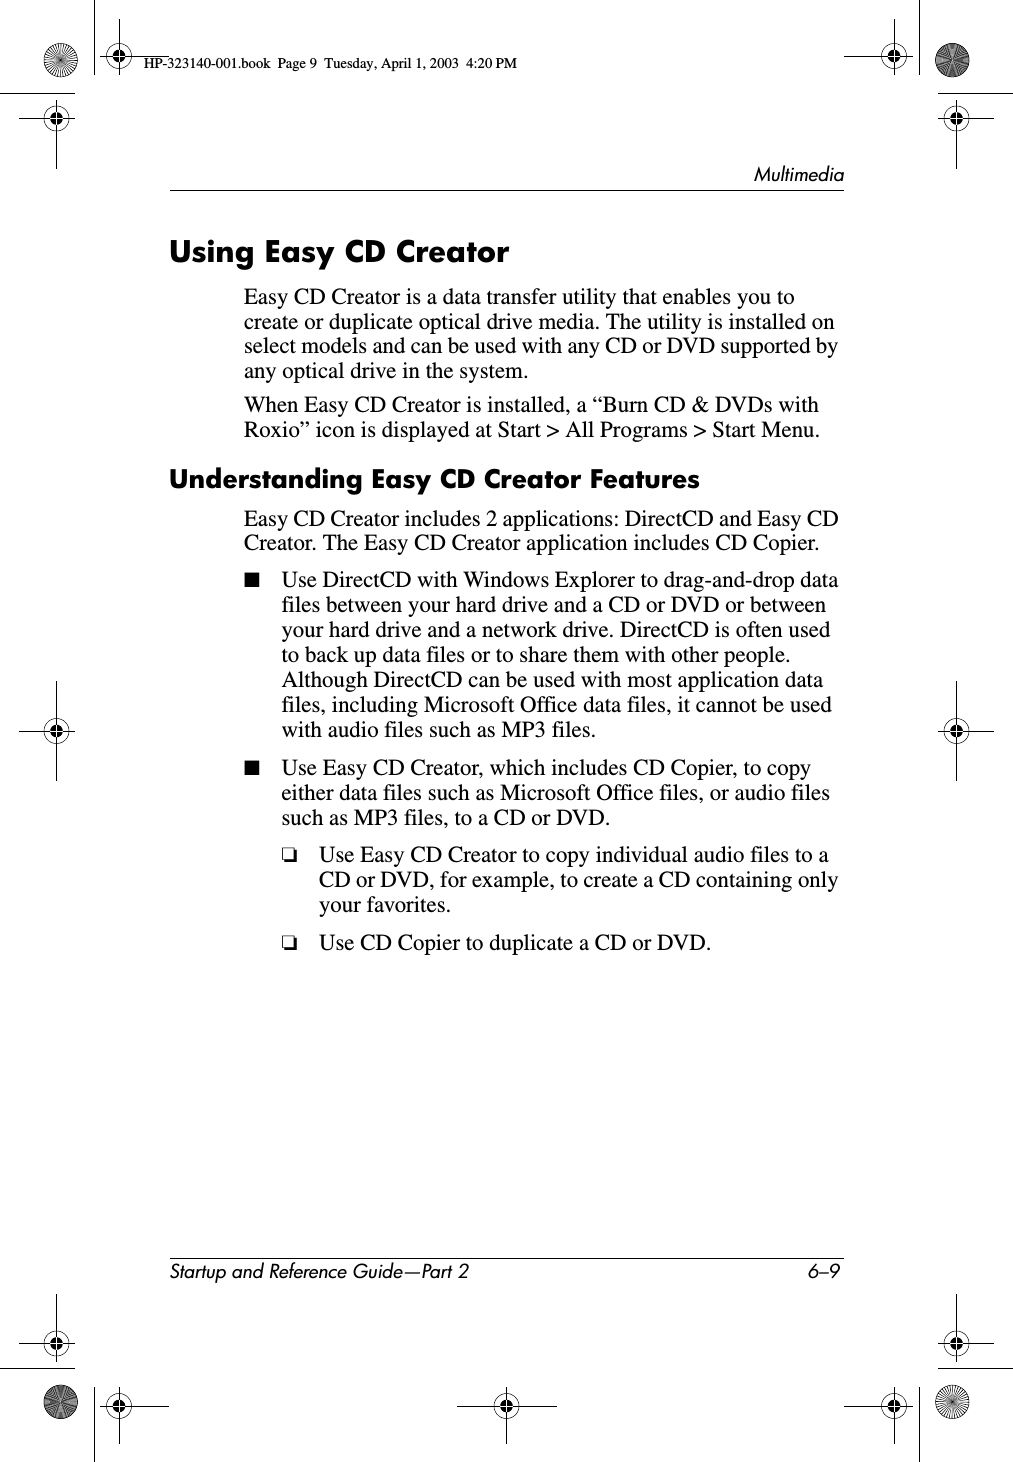 MultimediaStartup and Reference Guide—Part 2 6–9Using Easy CD CreatorEasy CD Creator is a data transfer utility that enables you to create or duplicate optical drive media. The utility is installed on select models and can be used with any CD or DVD supported by any optical drive in the system. When Easy CD Creator is installed, a “Burn CD &amp; DVDs with Roxio” icon is displayed at Start &gt; All Programs &gt; Start Menu. Understanding Easy CD Creator FeaturesEasy CD Creator includes 2 applications: DirectCD and Easy CD Creator. The Easy CD Creator application includes CD Copier.■Use DirectCD with Windows Explorer to drag-and-drop data files between your hard drive and a CD or DVD or between your hard drive and a network drive. DirectCD is often used to back up data files or to share them with other people. Although DirectCD can be used with most application data files, including Microsoft Office data files, it cannot be used with audio files such as MP3 files.■Use Easy CD Creator, which includes CD Copier, to copy either data files such as Microsoft Office files, or audio files such as MP3 files, to a CD or DVD.❏Use Easy CD Creator to copy individual audio files to a CD or DVD, for example, to create a CD containing only your favorites.❏Use CD Copier to duplicate a CD or DVD.HP-323140-001.book  Page 9  Tuesday, April 1, 2003  4:20 PM